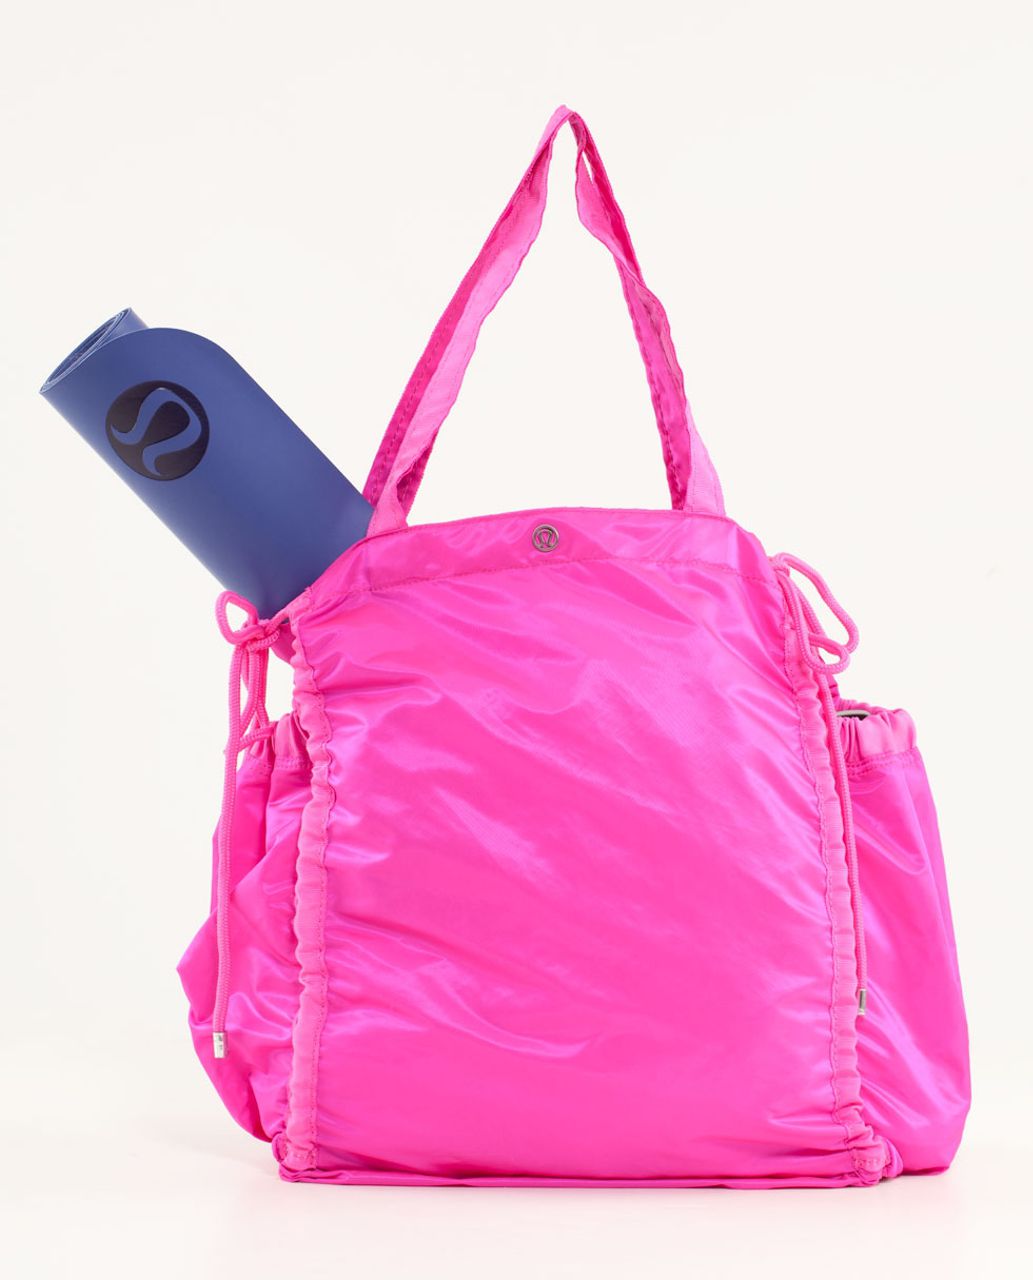 Lululemon Pack Your Practice Bag - Pow Pink